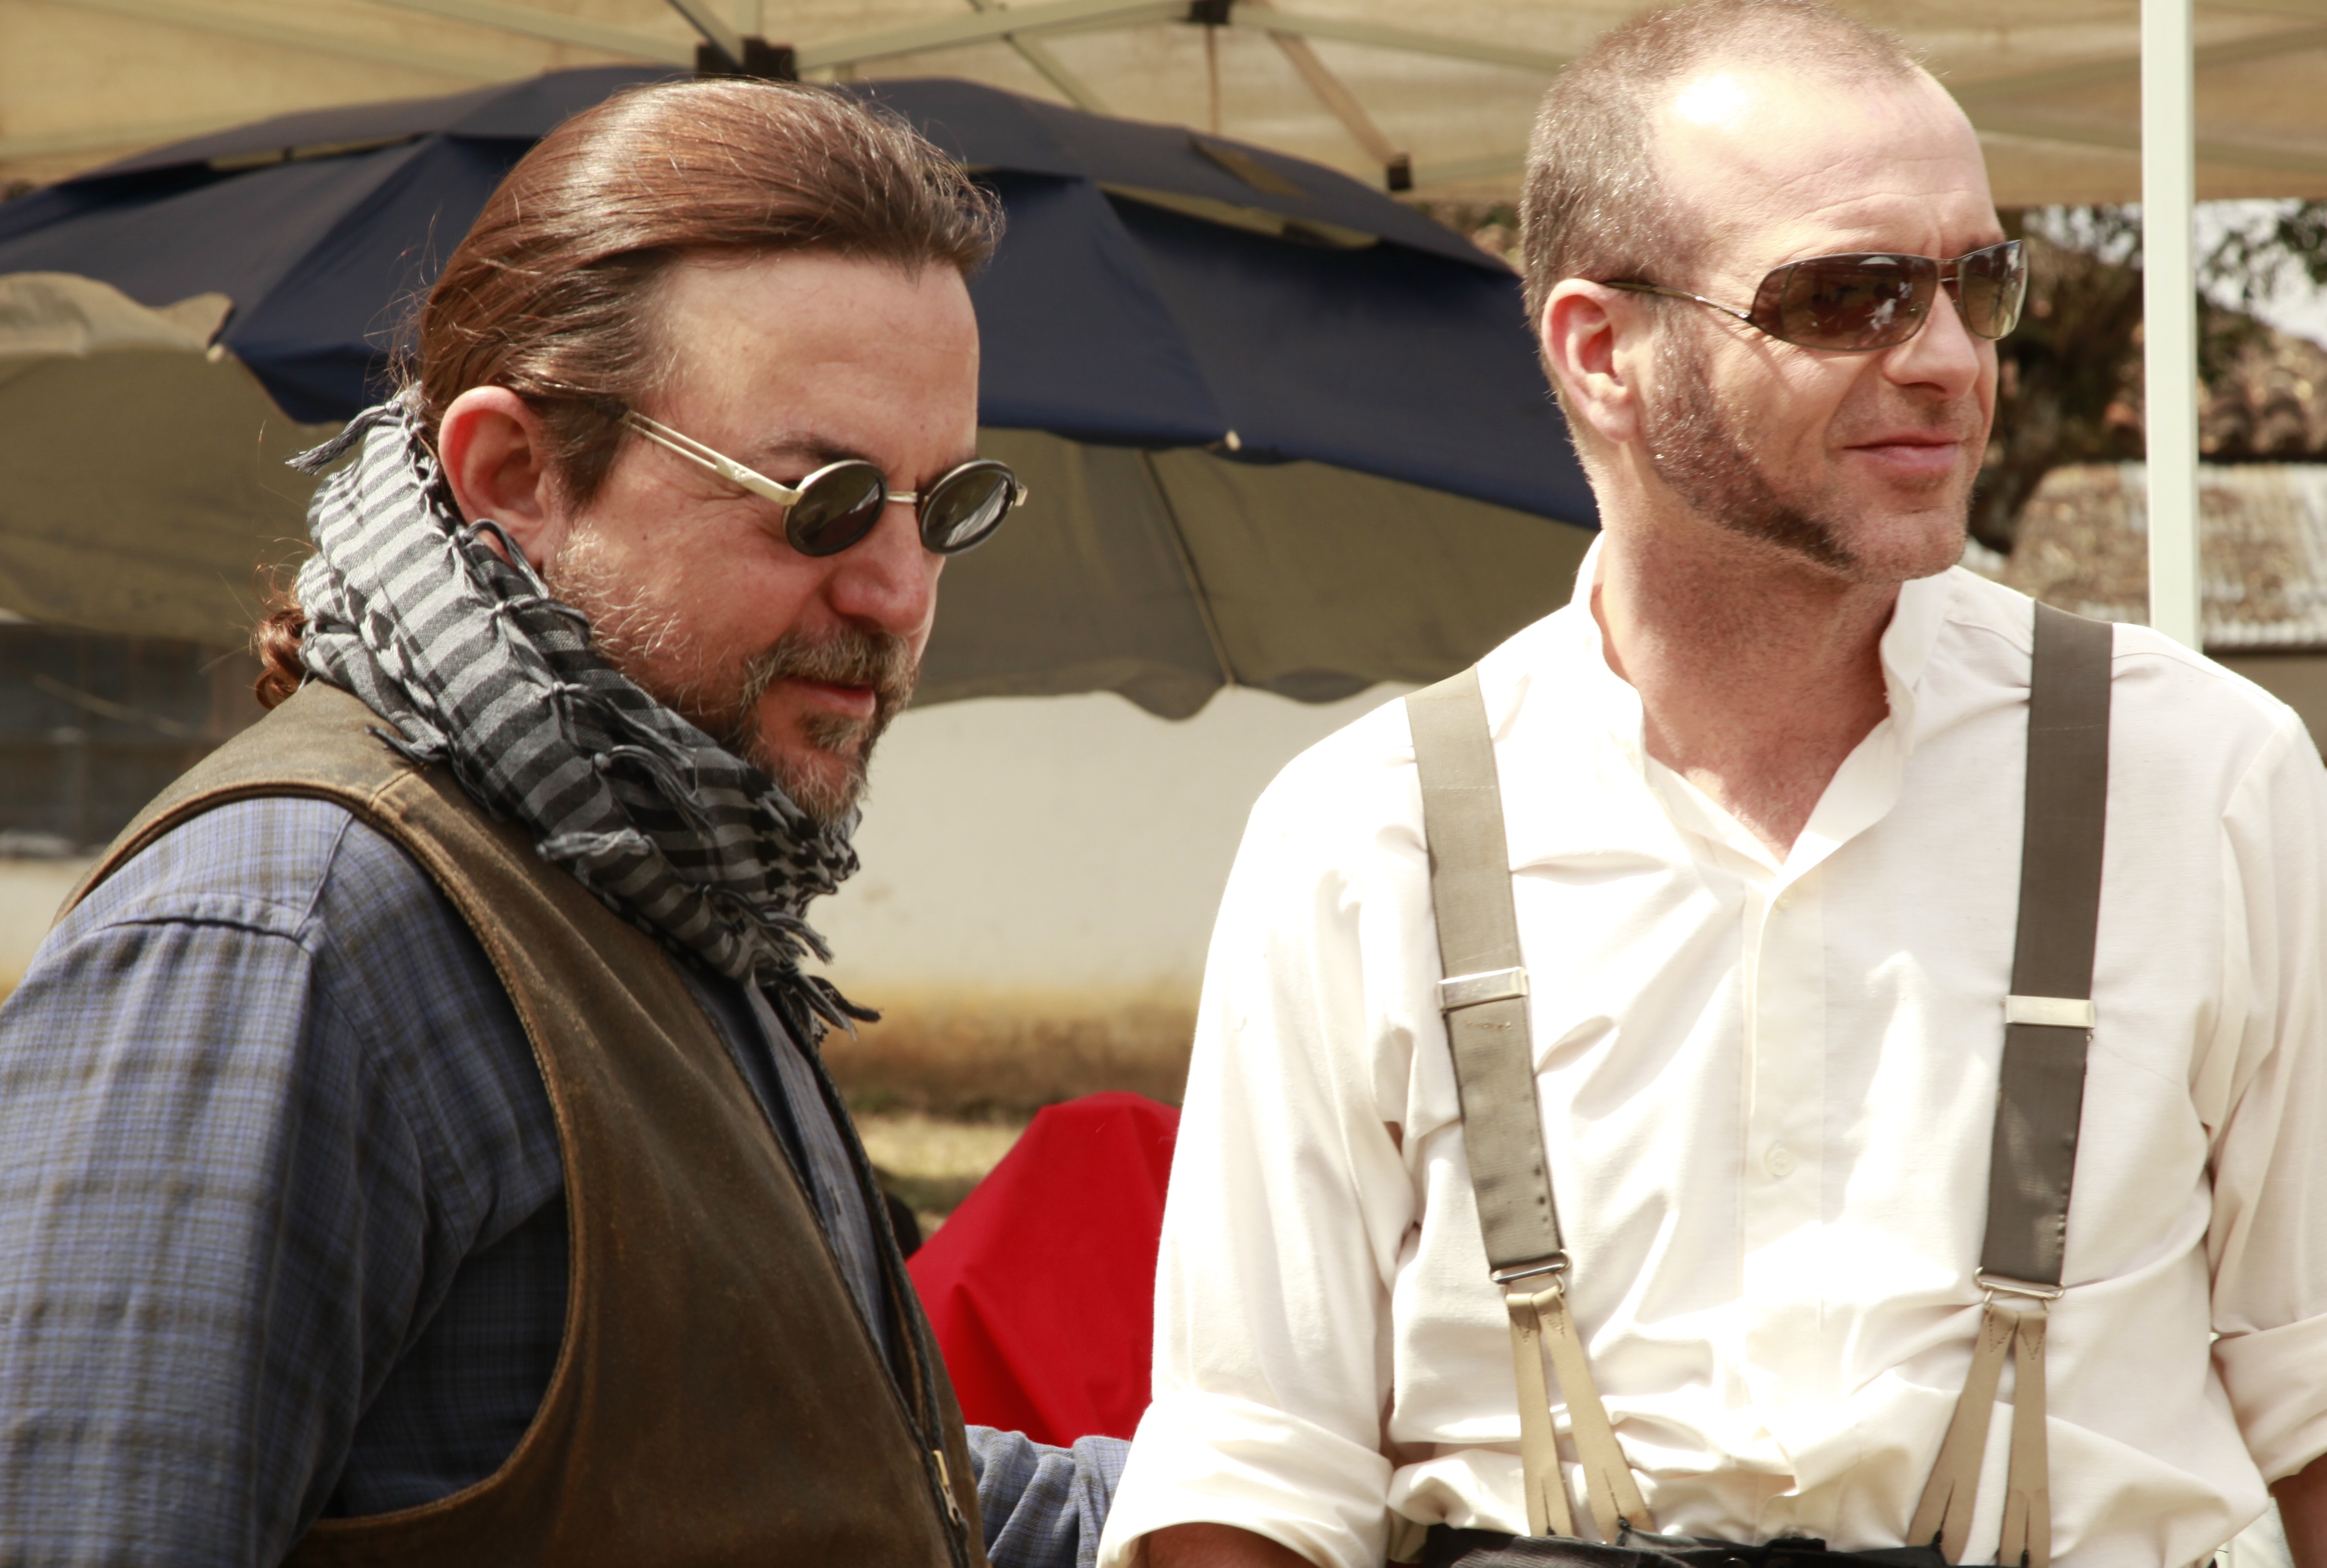 With Hugo Speer filming Chiapas The Heart of Coffee